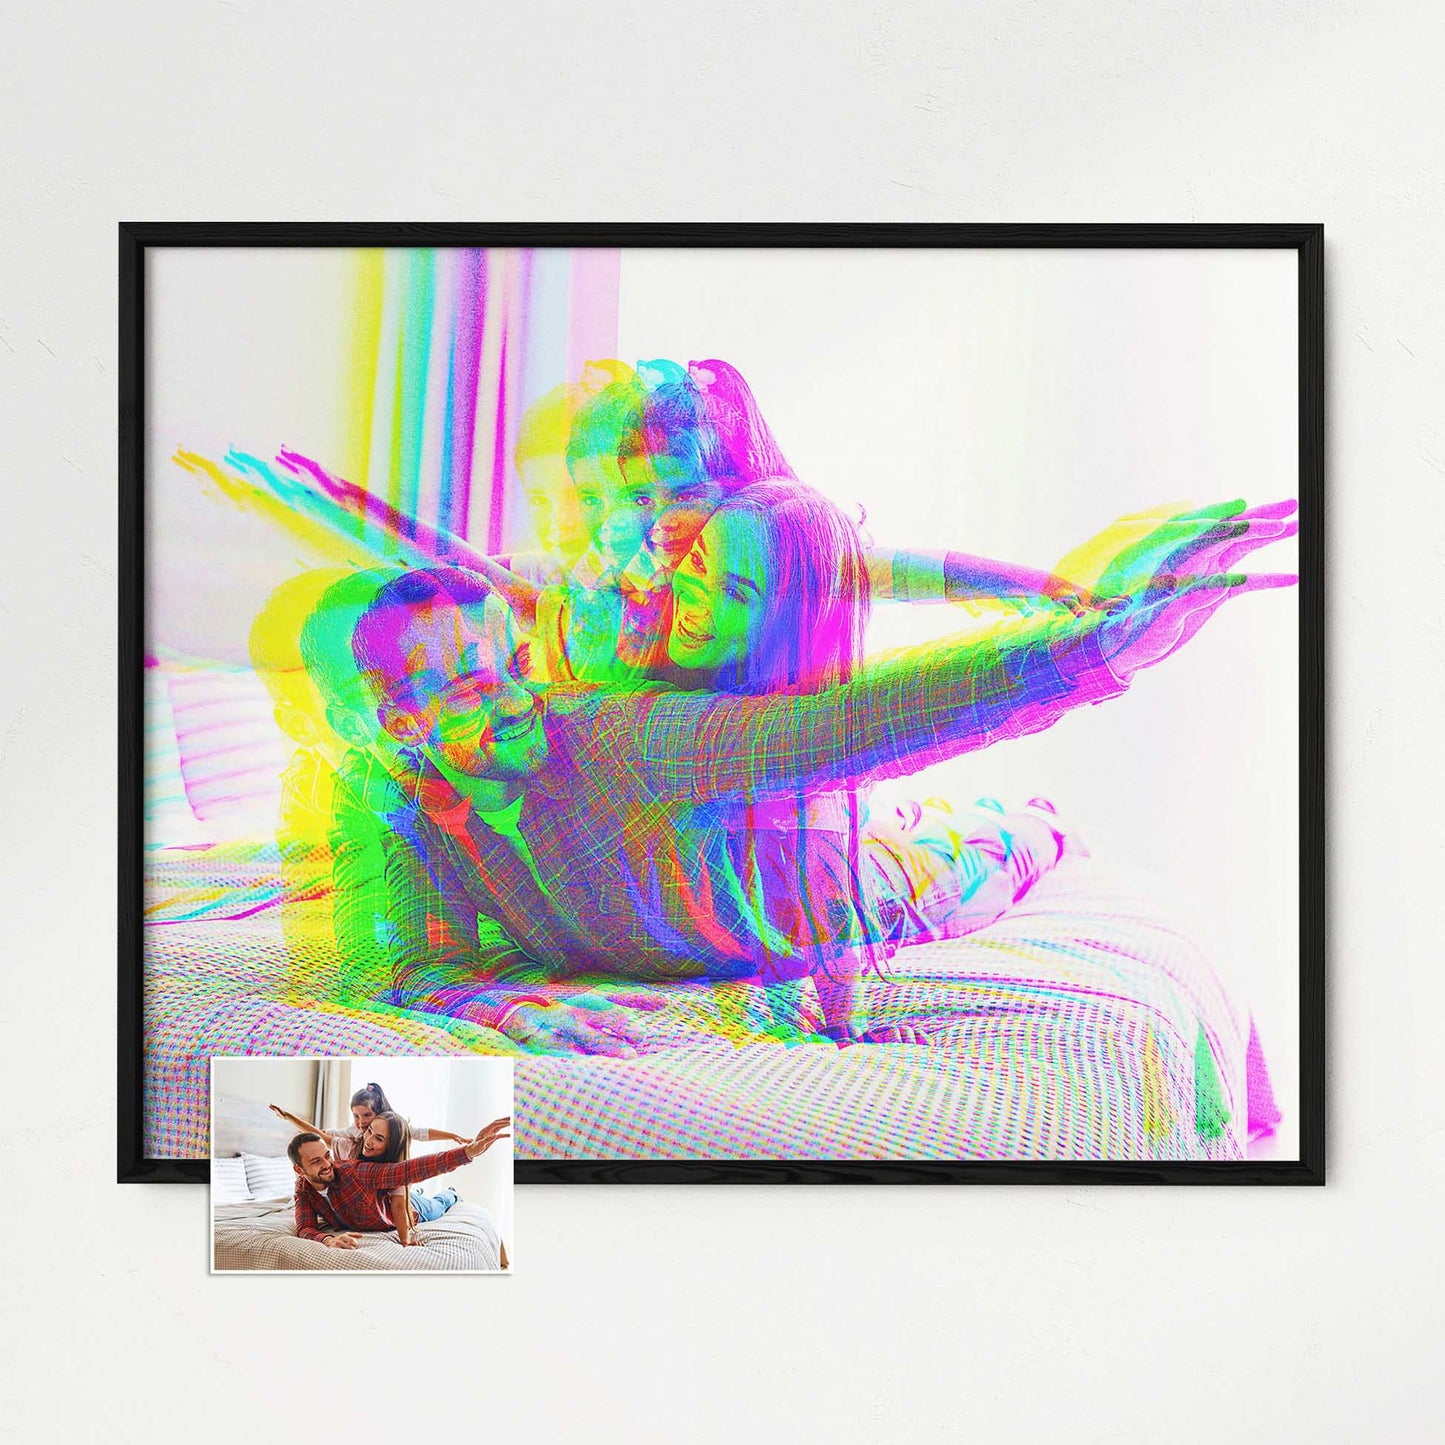 Thoughtful Gift for Any Occasion: Whether it's an anniversary, birthday, or simply a gesture of appreciation, this personalized anaglyph print makes a thoughtful gift. Its cool and modern appeal appeals to art enthusiasts 